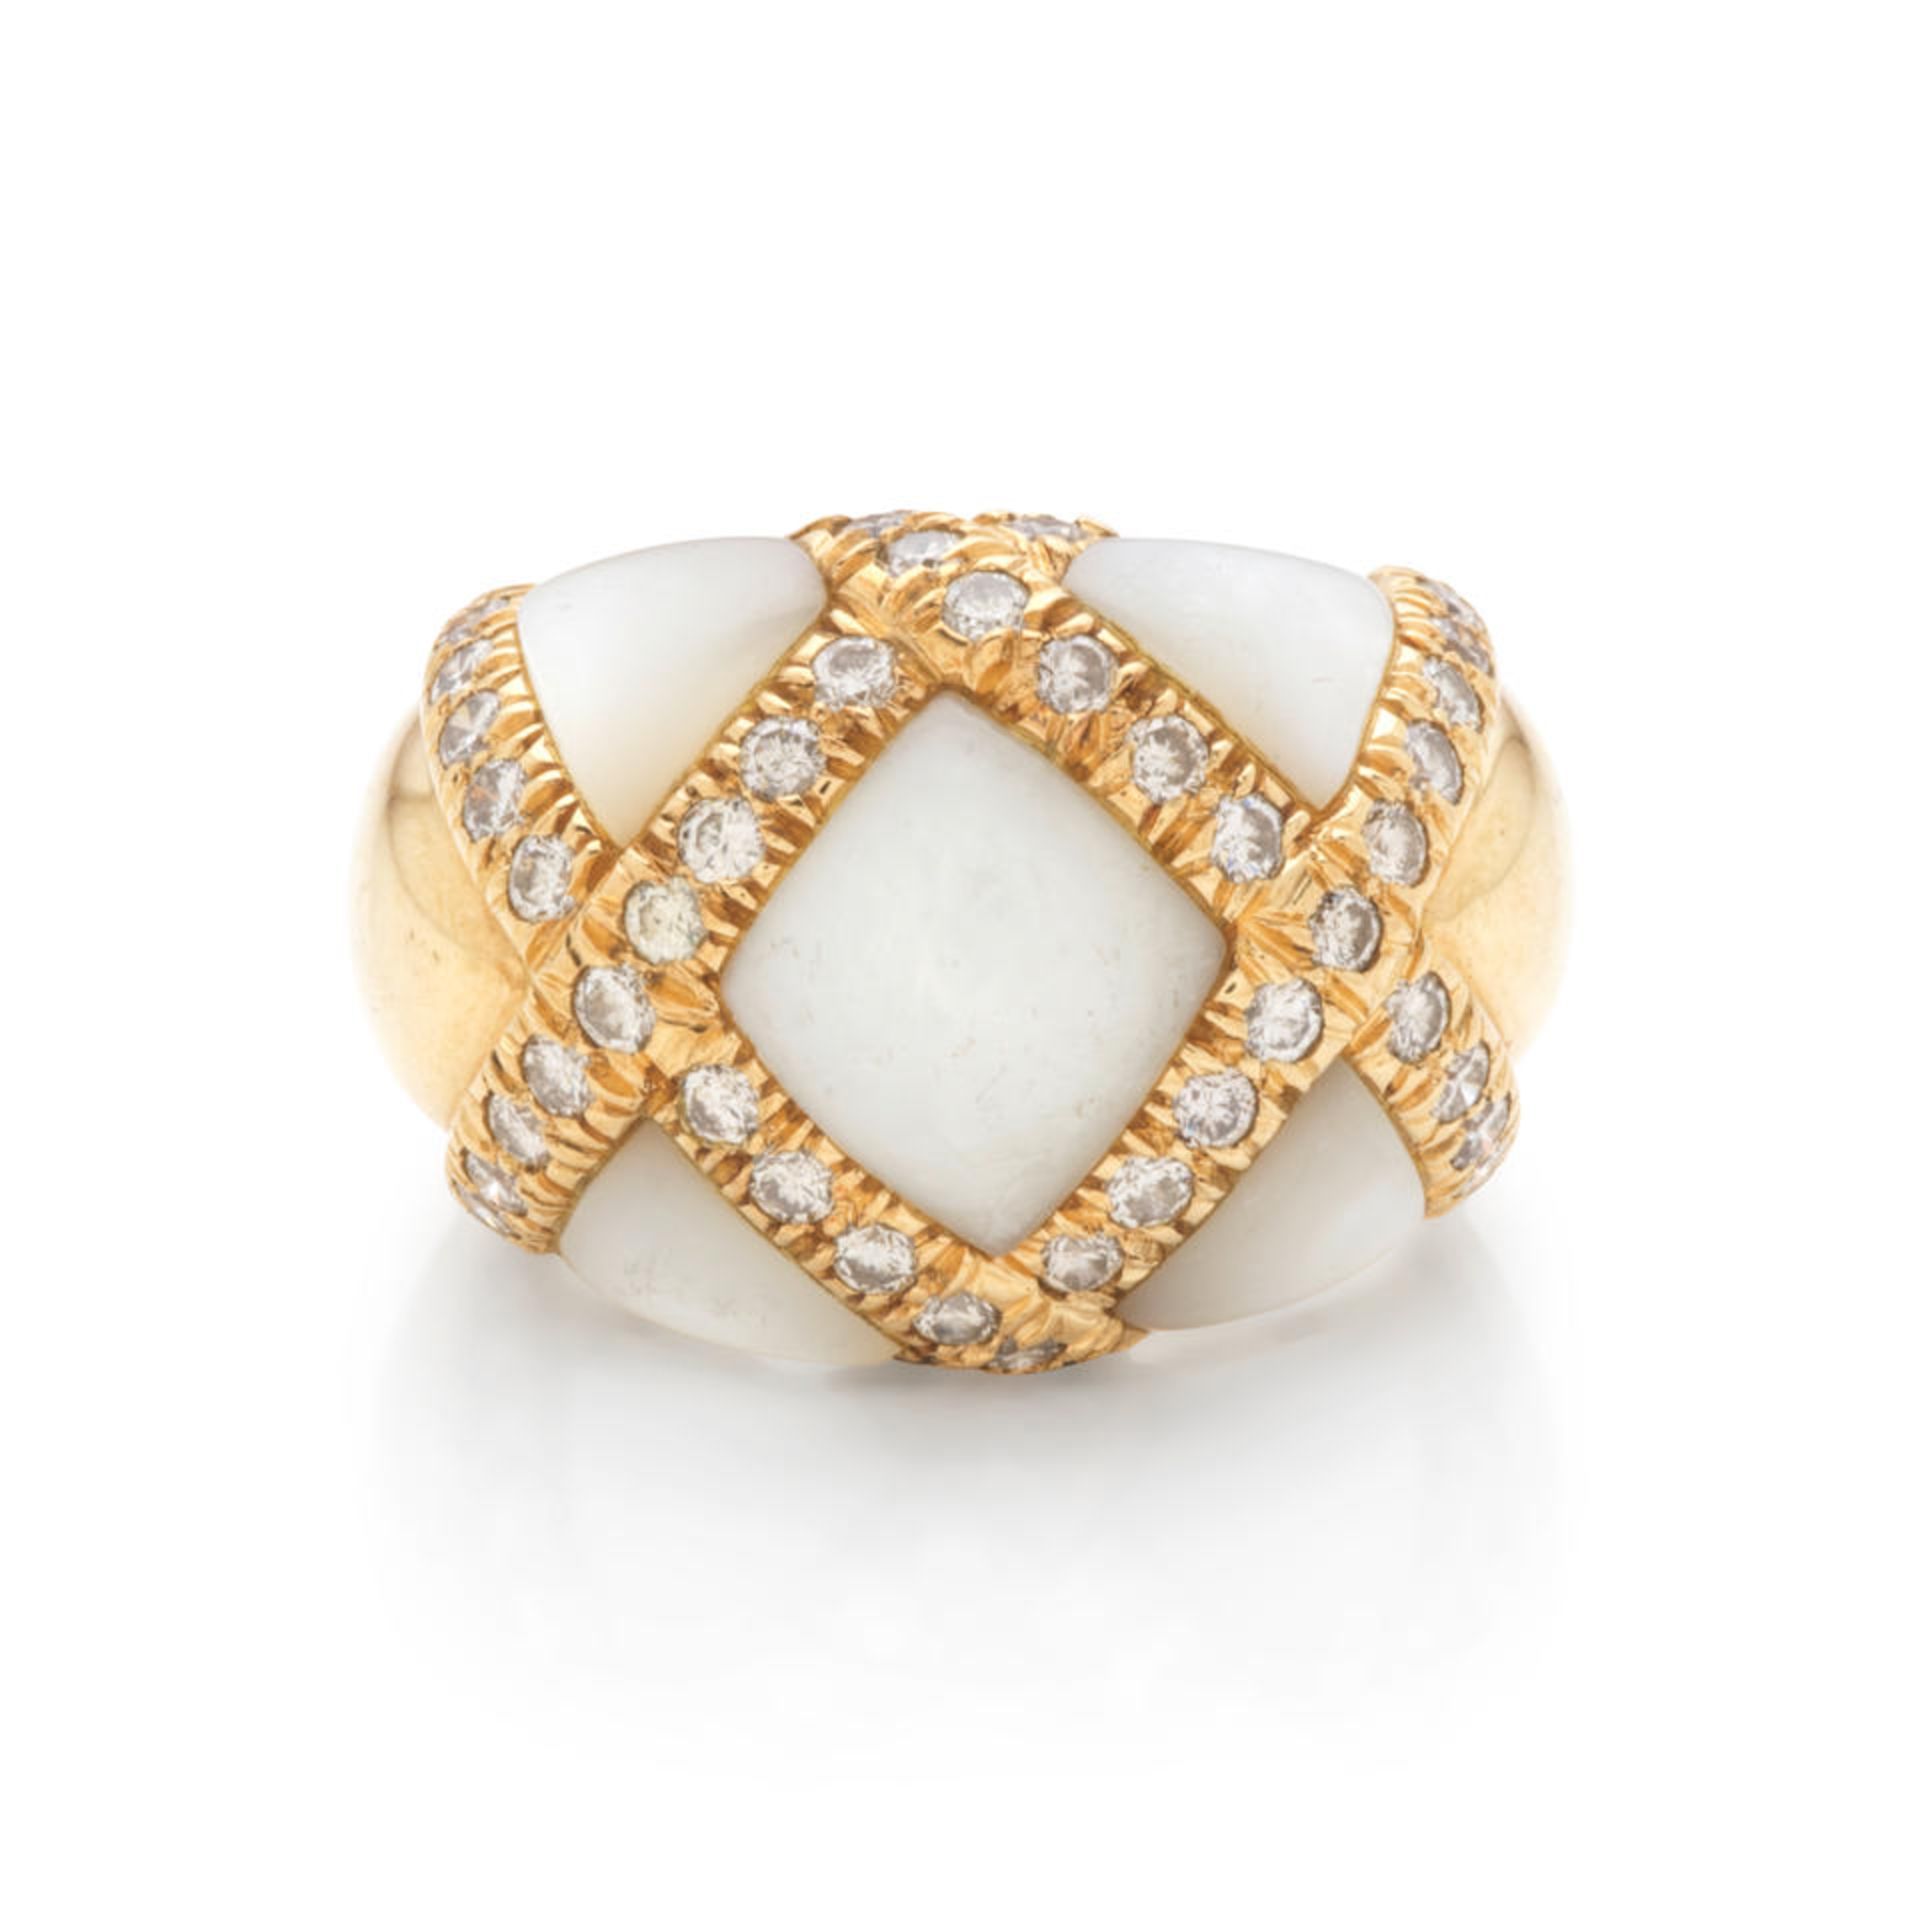 MOTHER-OF-PEARL AND DIAMOND RING BAGUE NACRE BLANCHE ET DIAMANTS